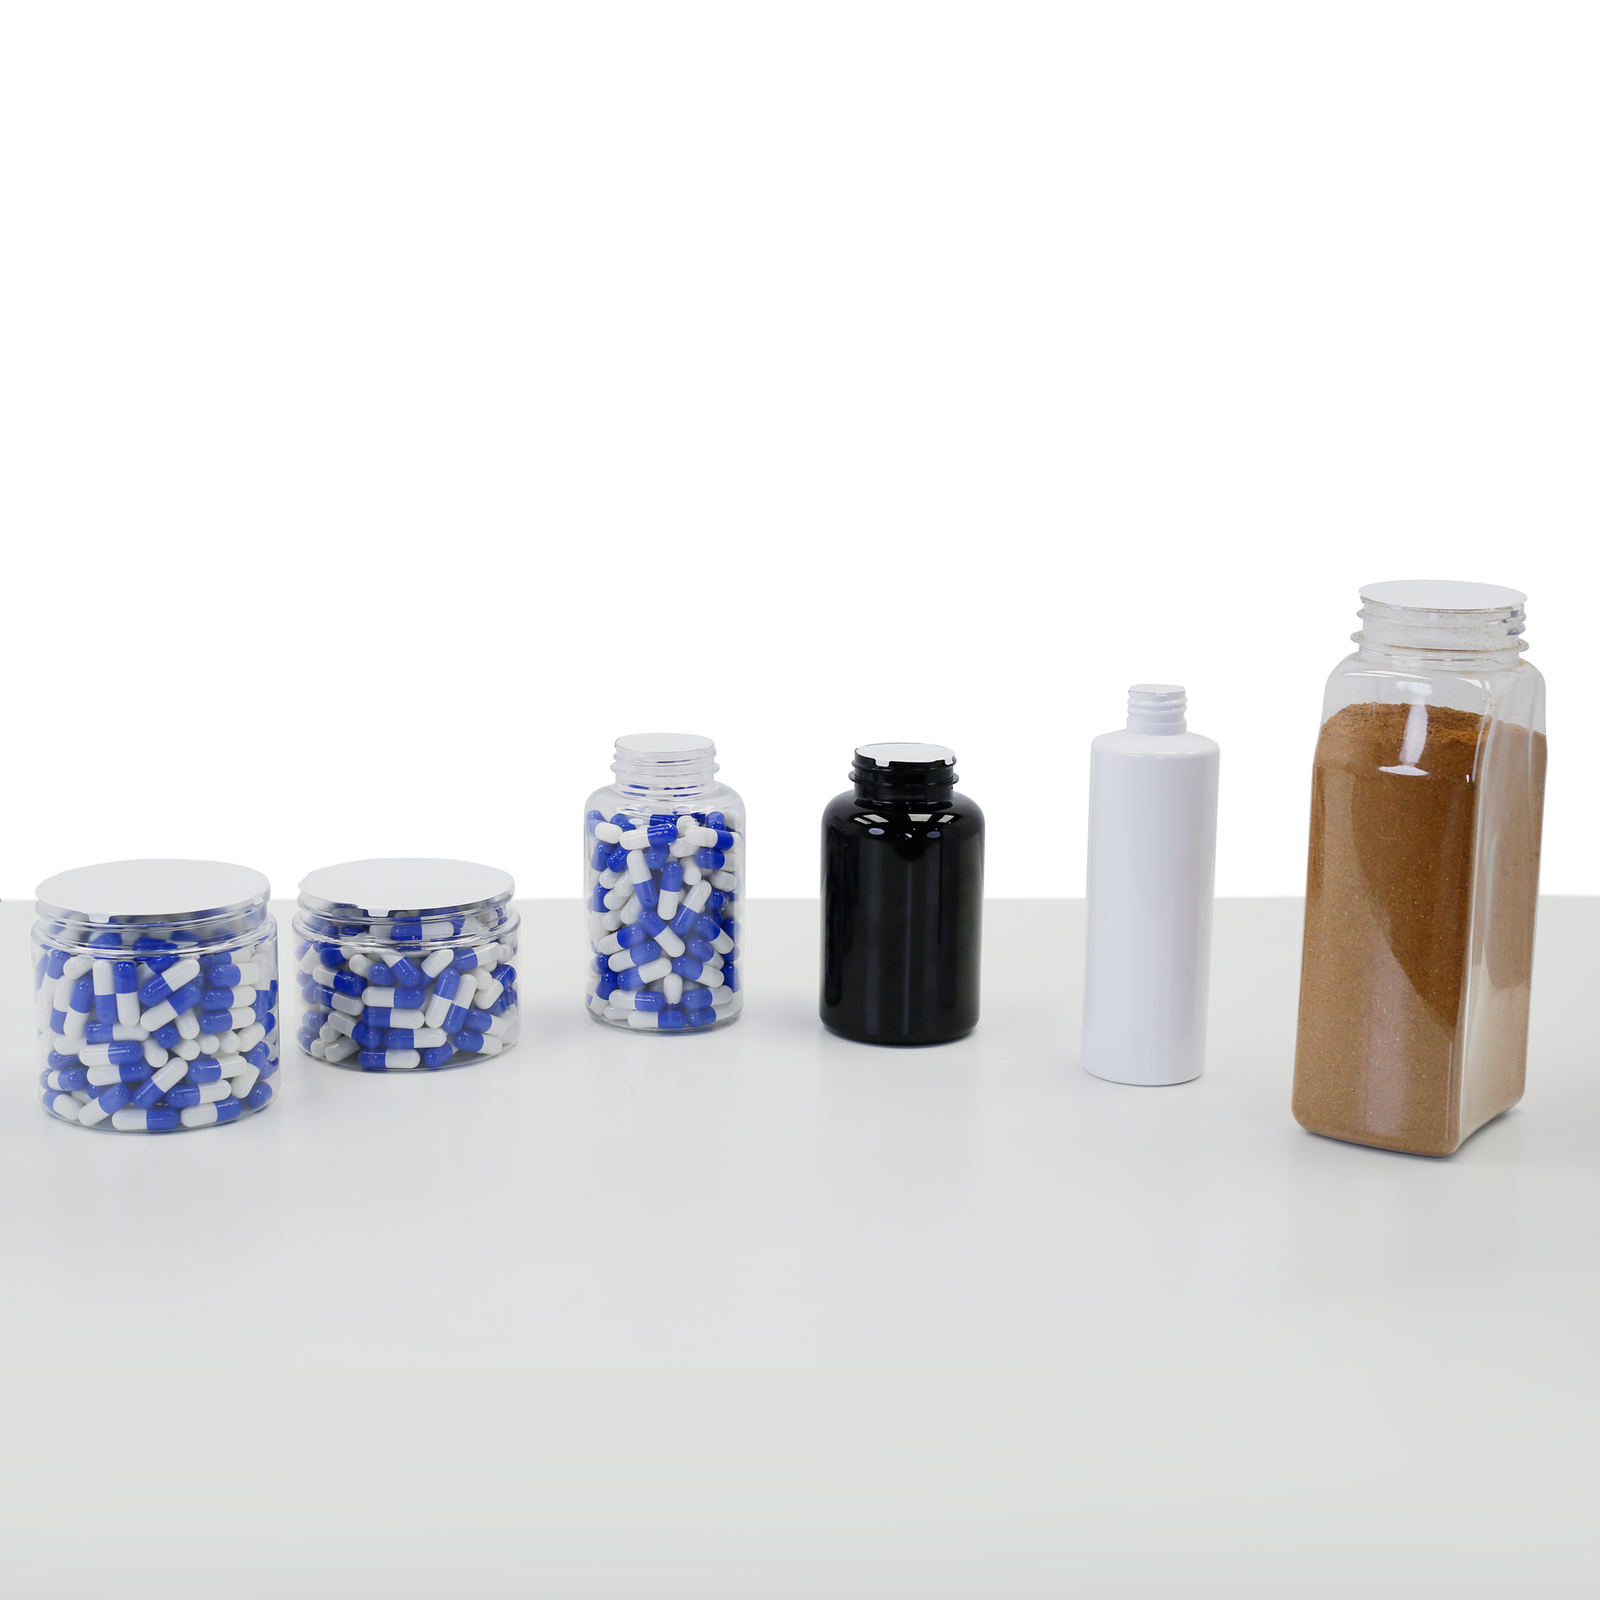 A collection of containers of different sized which have been sealed with induction liners using the JORES TECHNOLOGIES® electromagnetic cap sealer